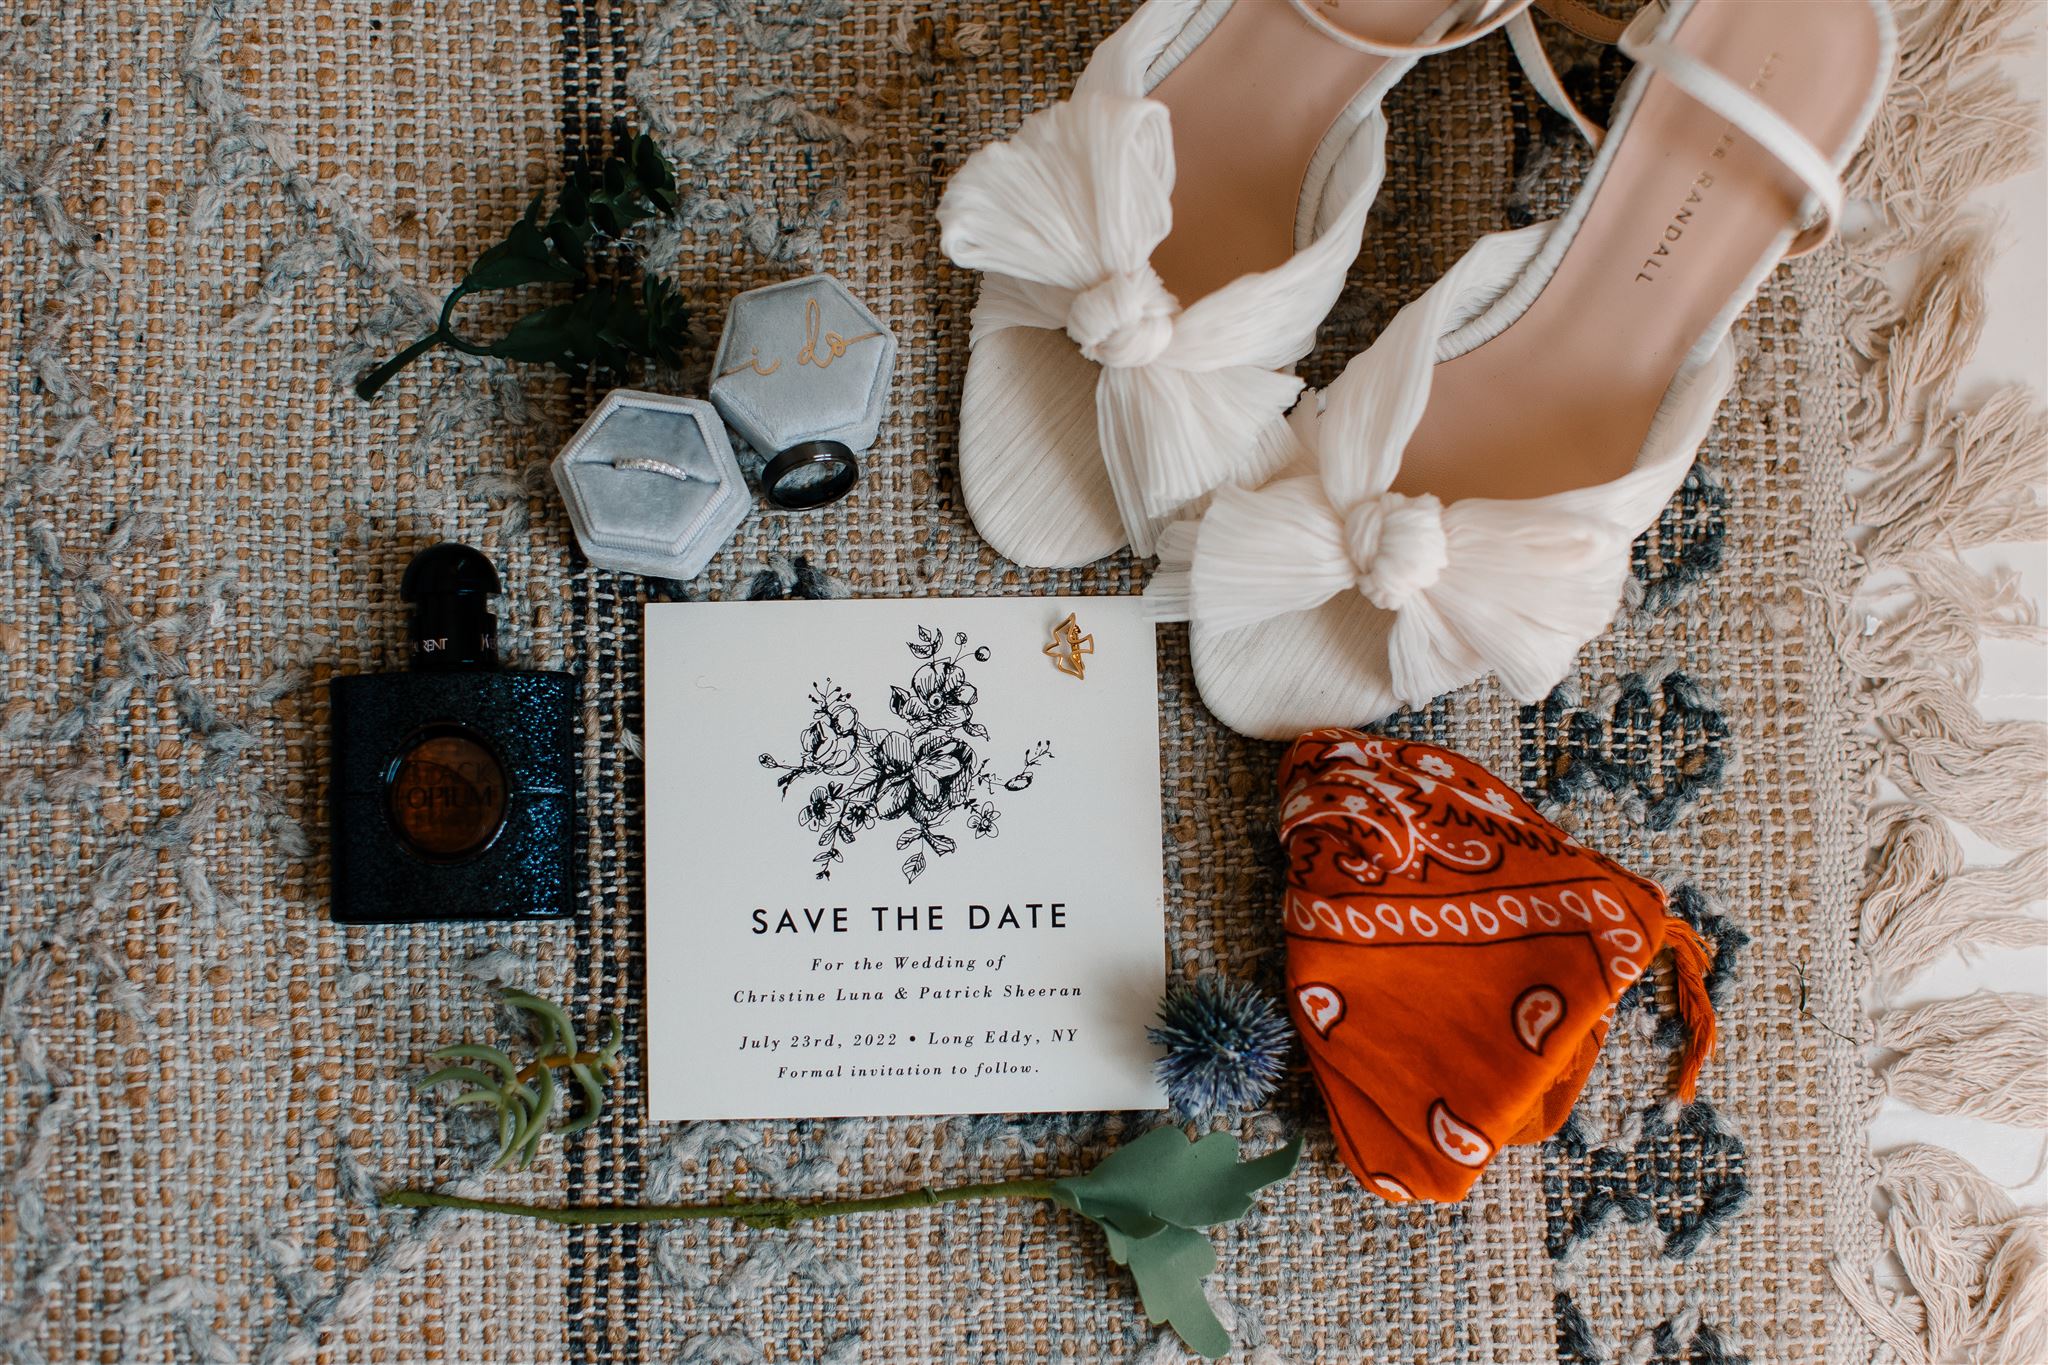 timeline of wedding planning - ordering wedding save the dates and invitations